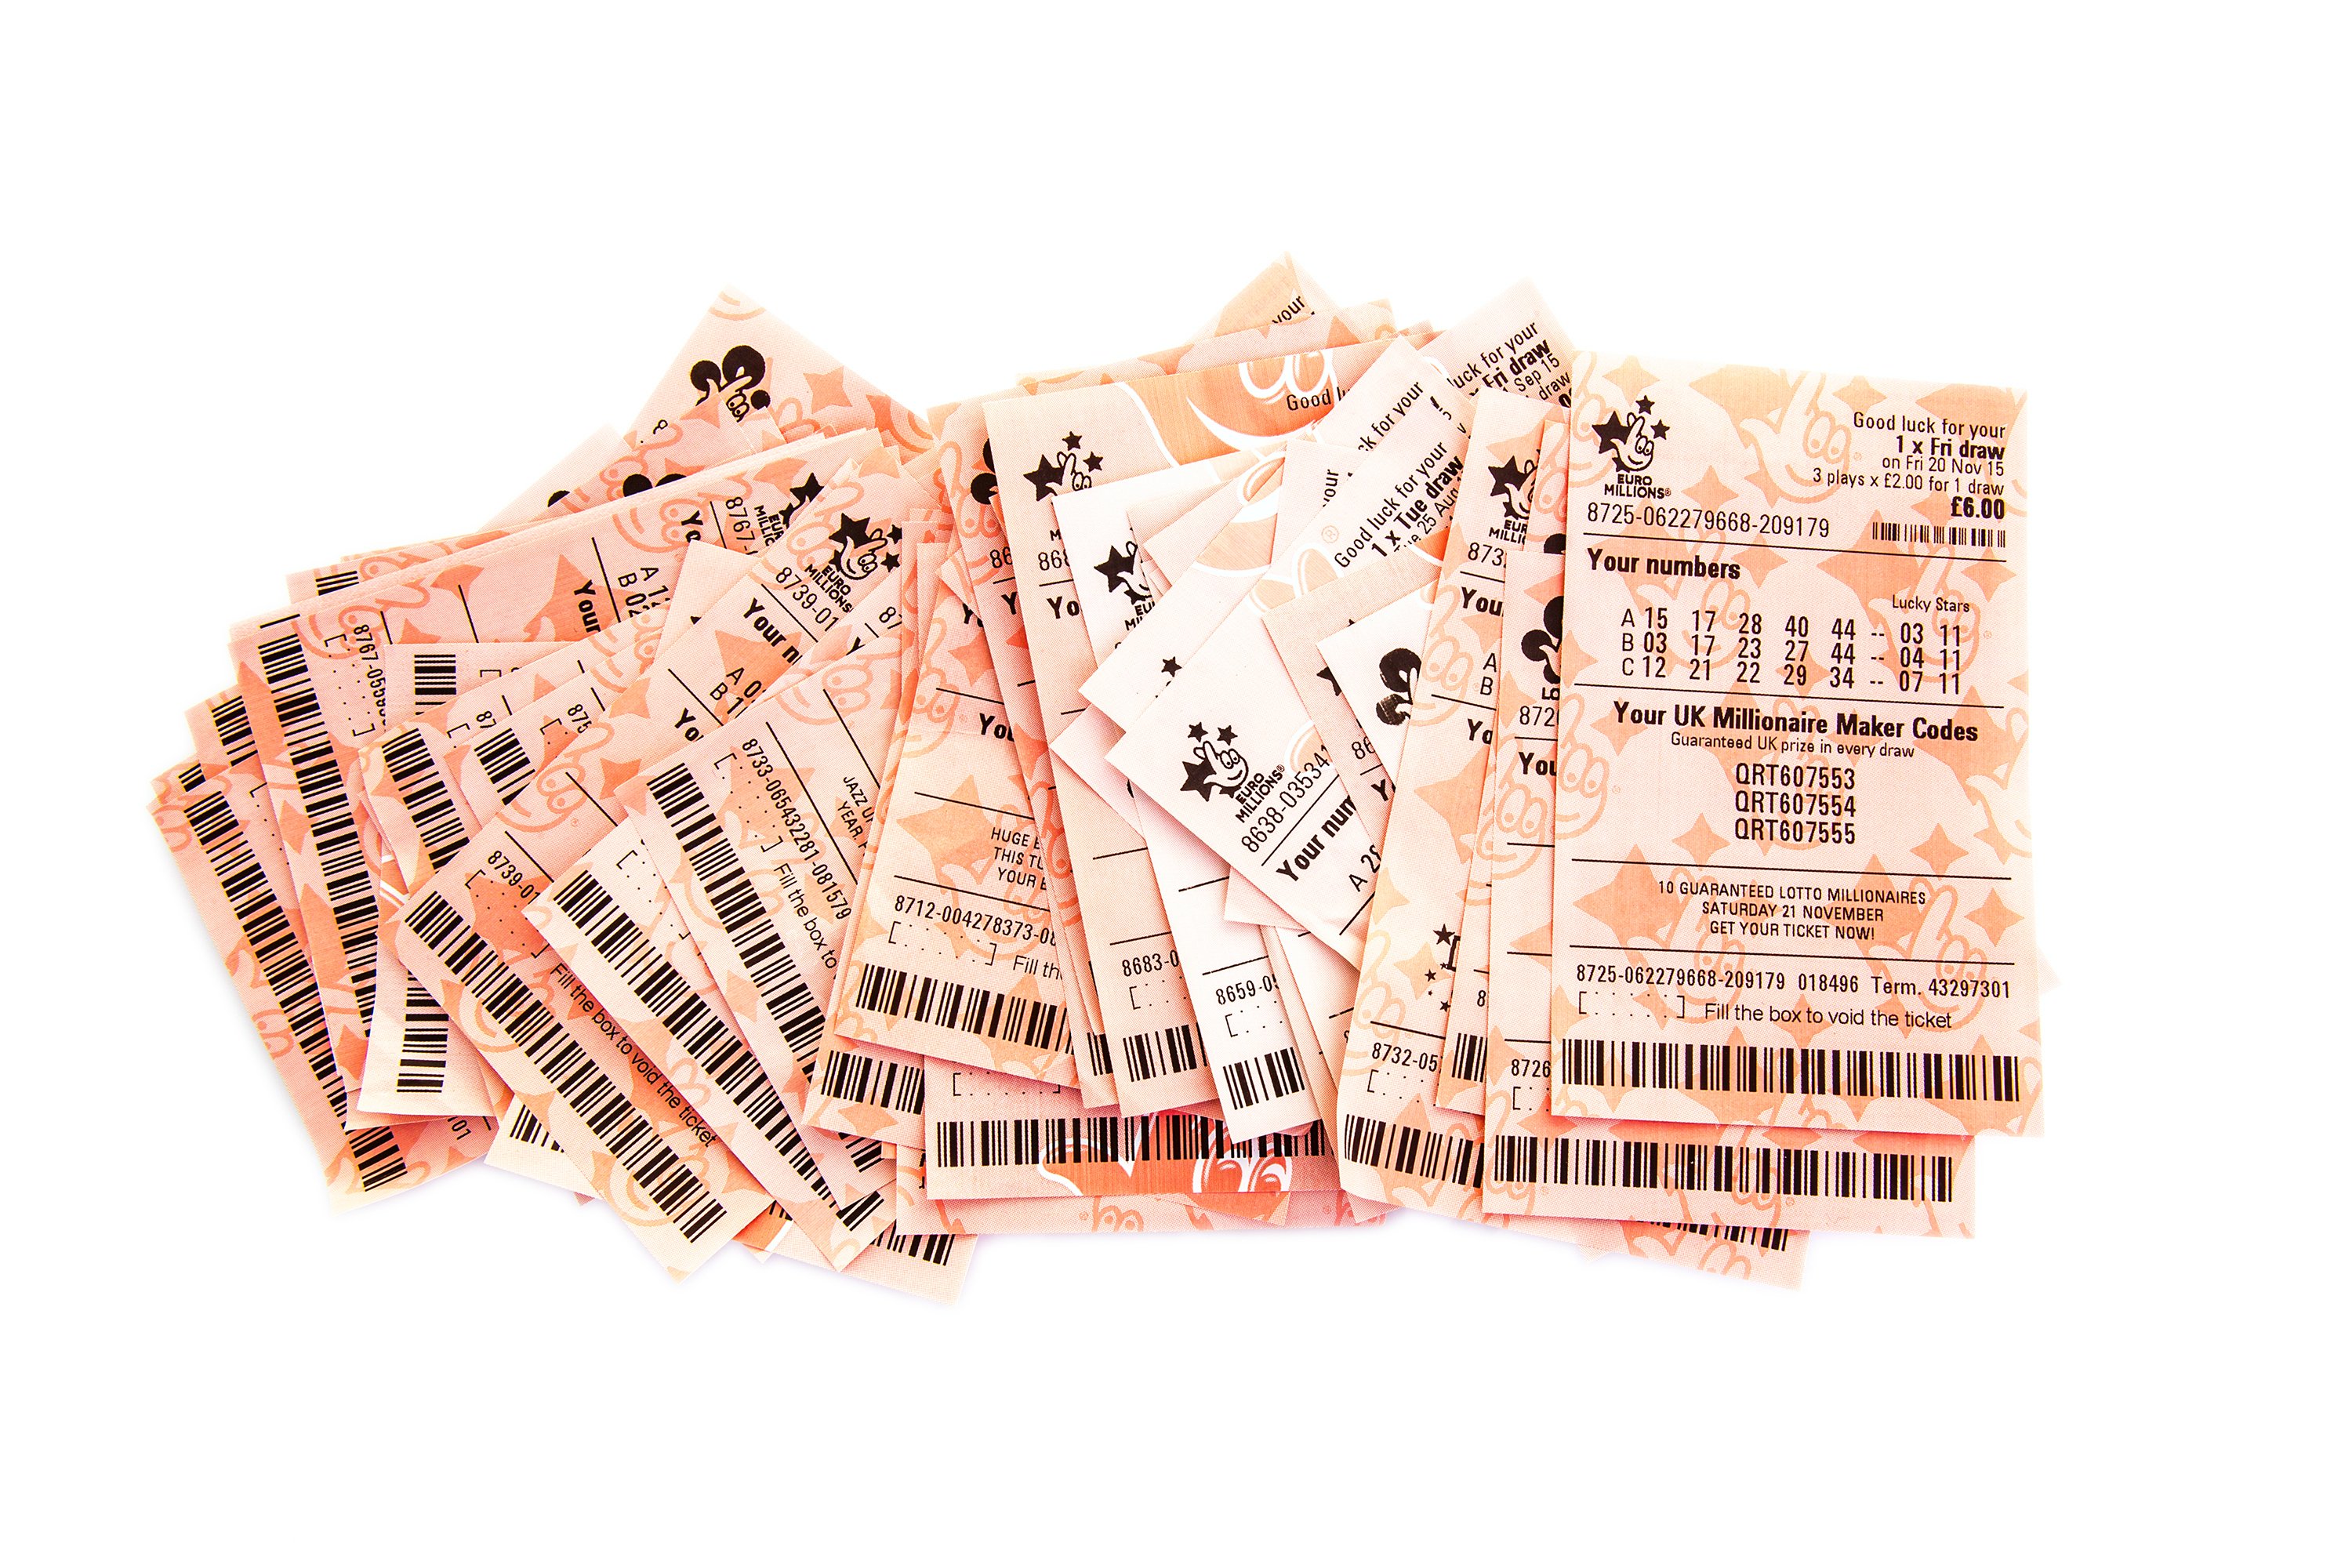 Several lottery tickets without a prize | Photo: Shutterstock